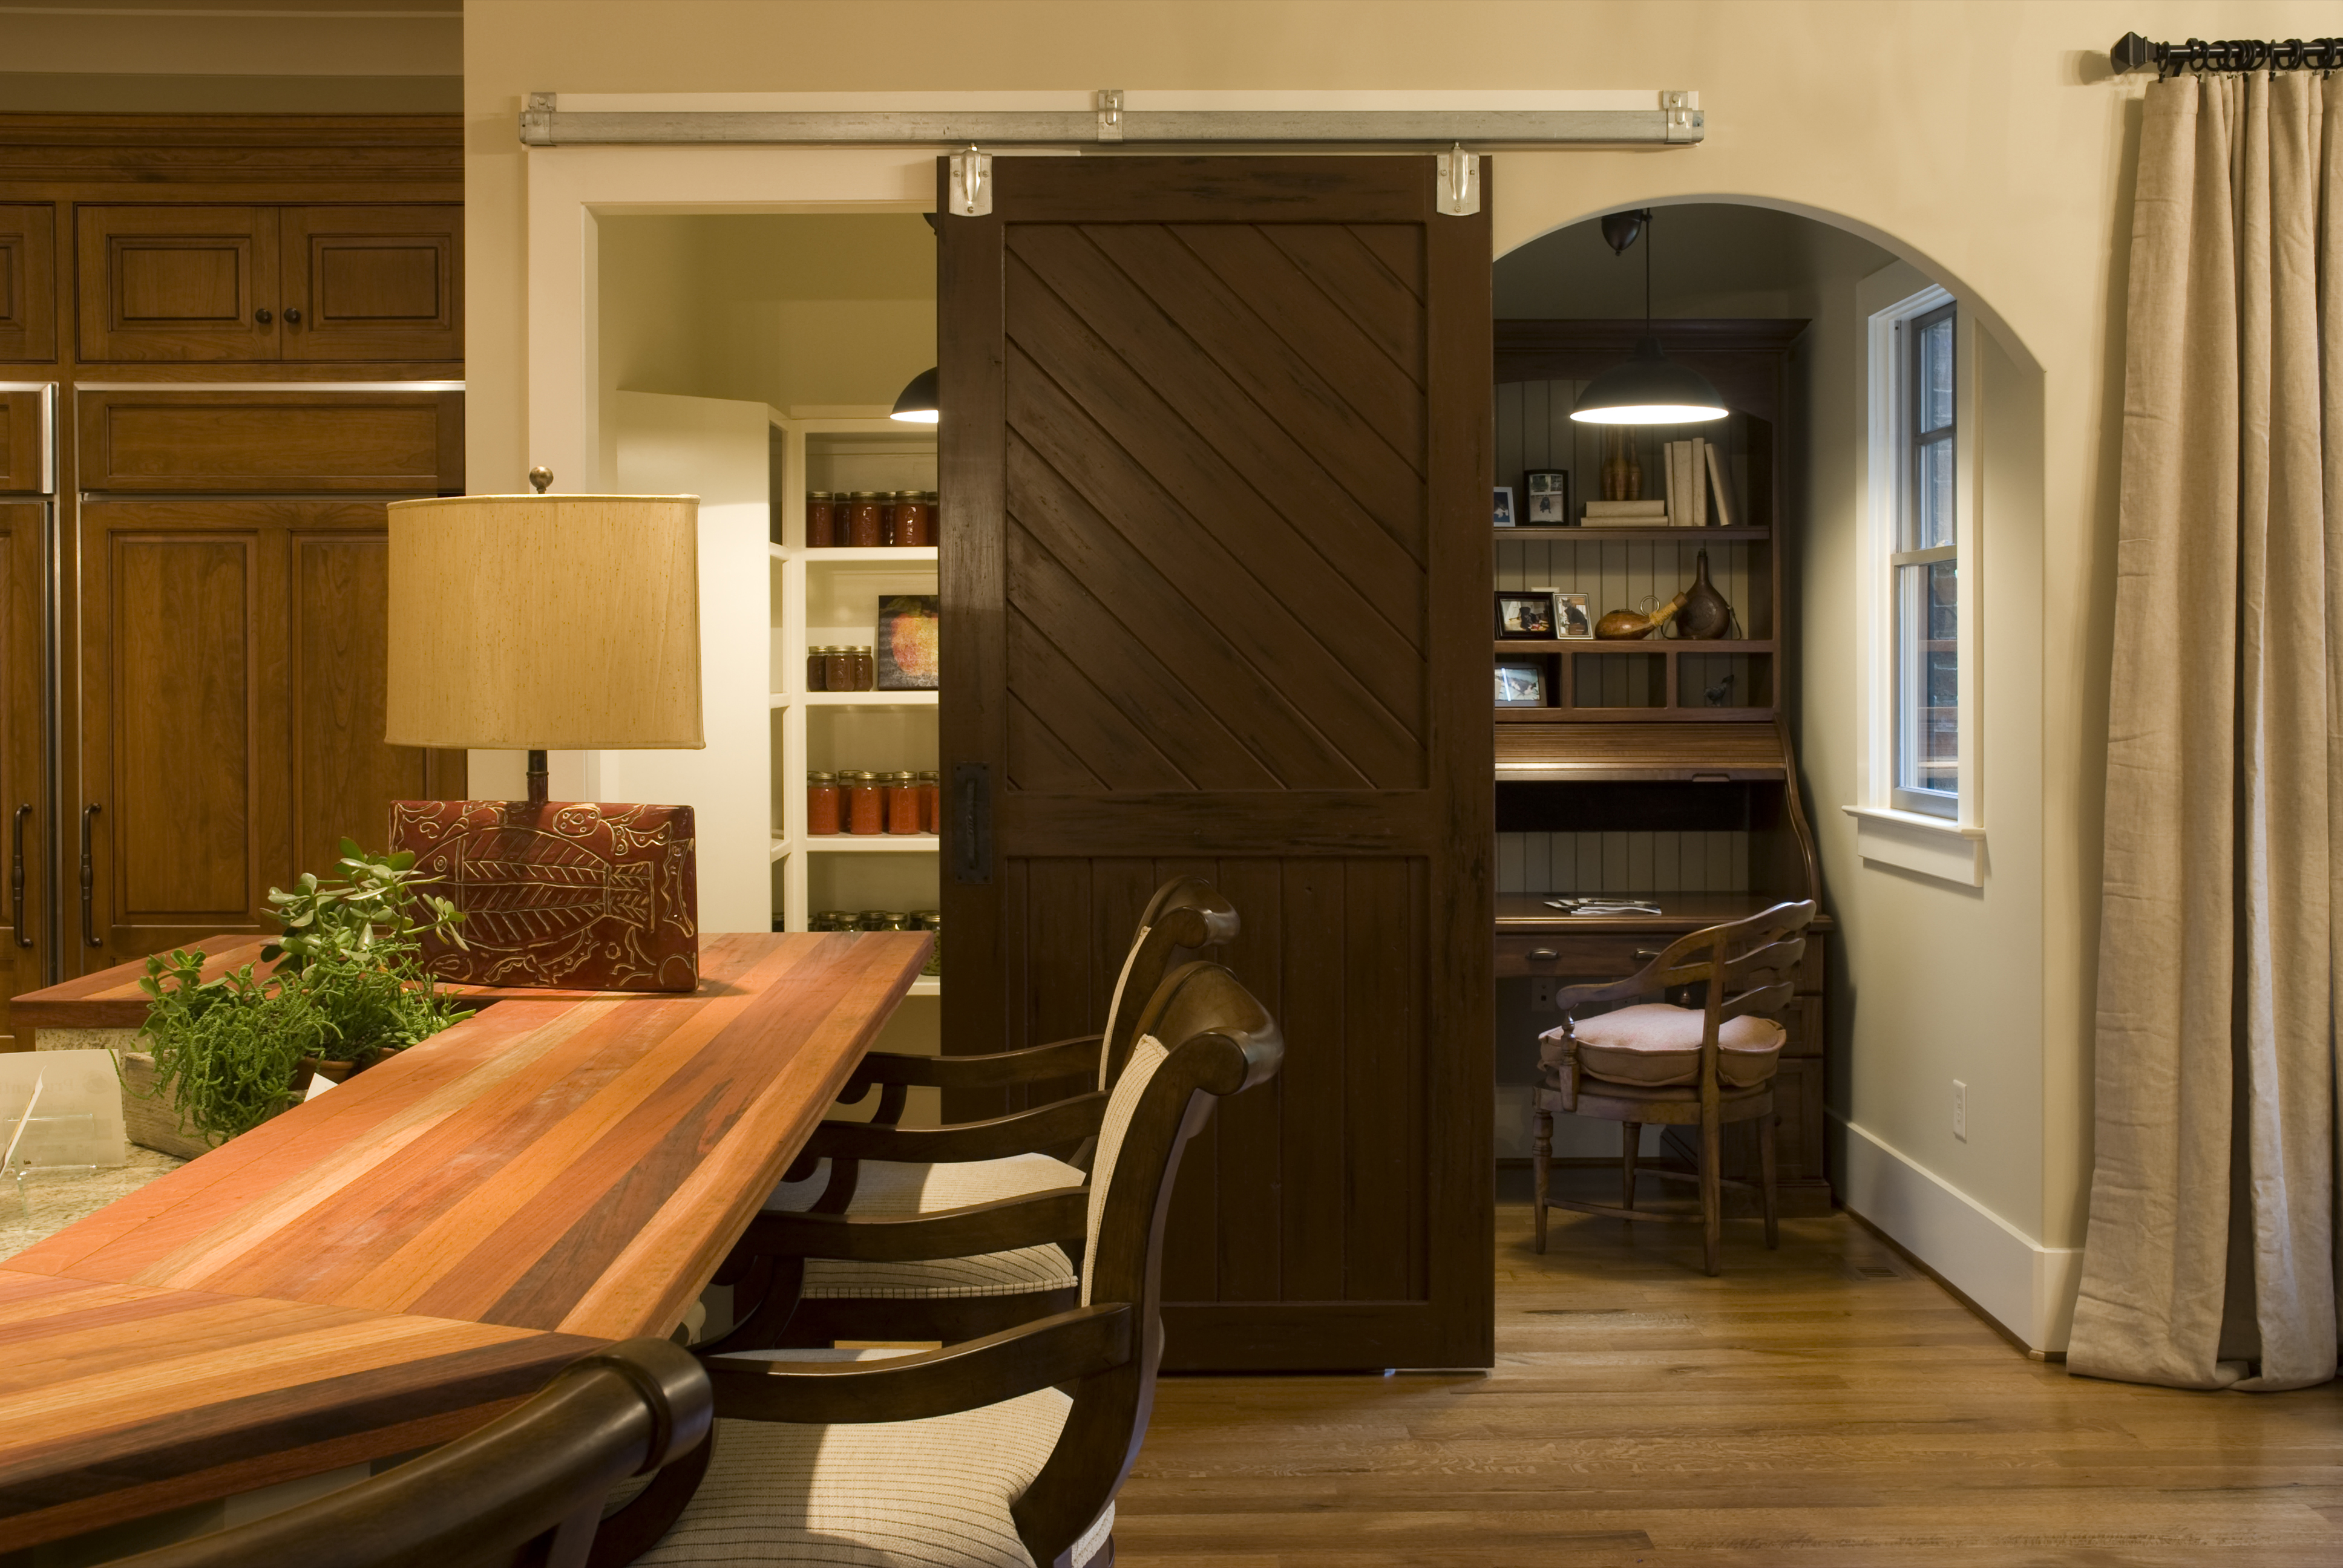 It got me thinking…what other barn style doors are out there? Take a 